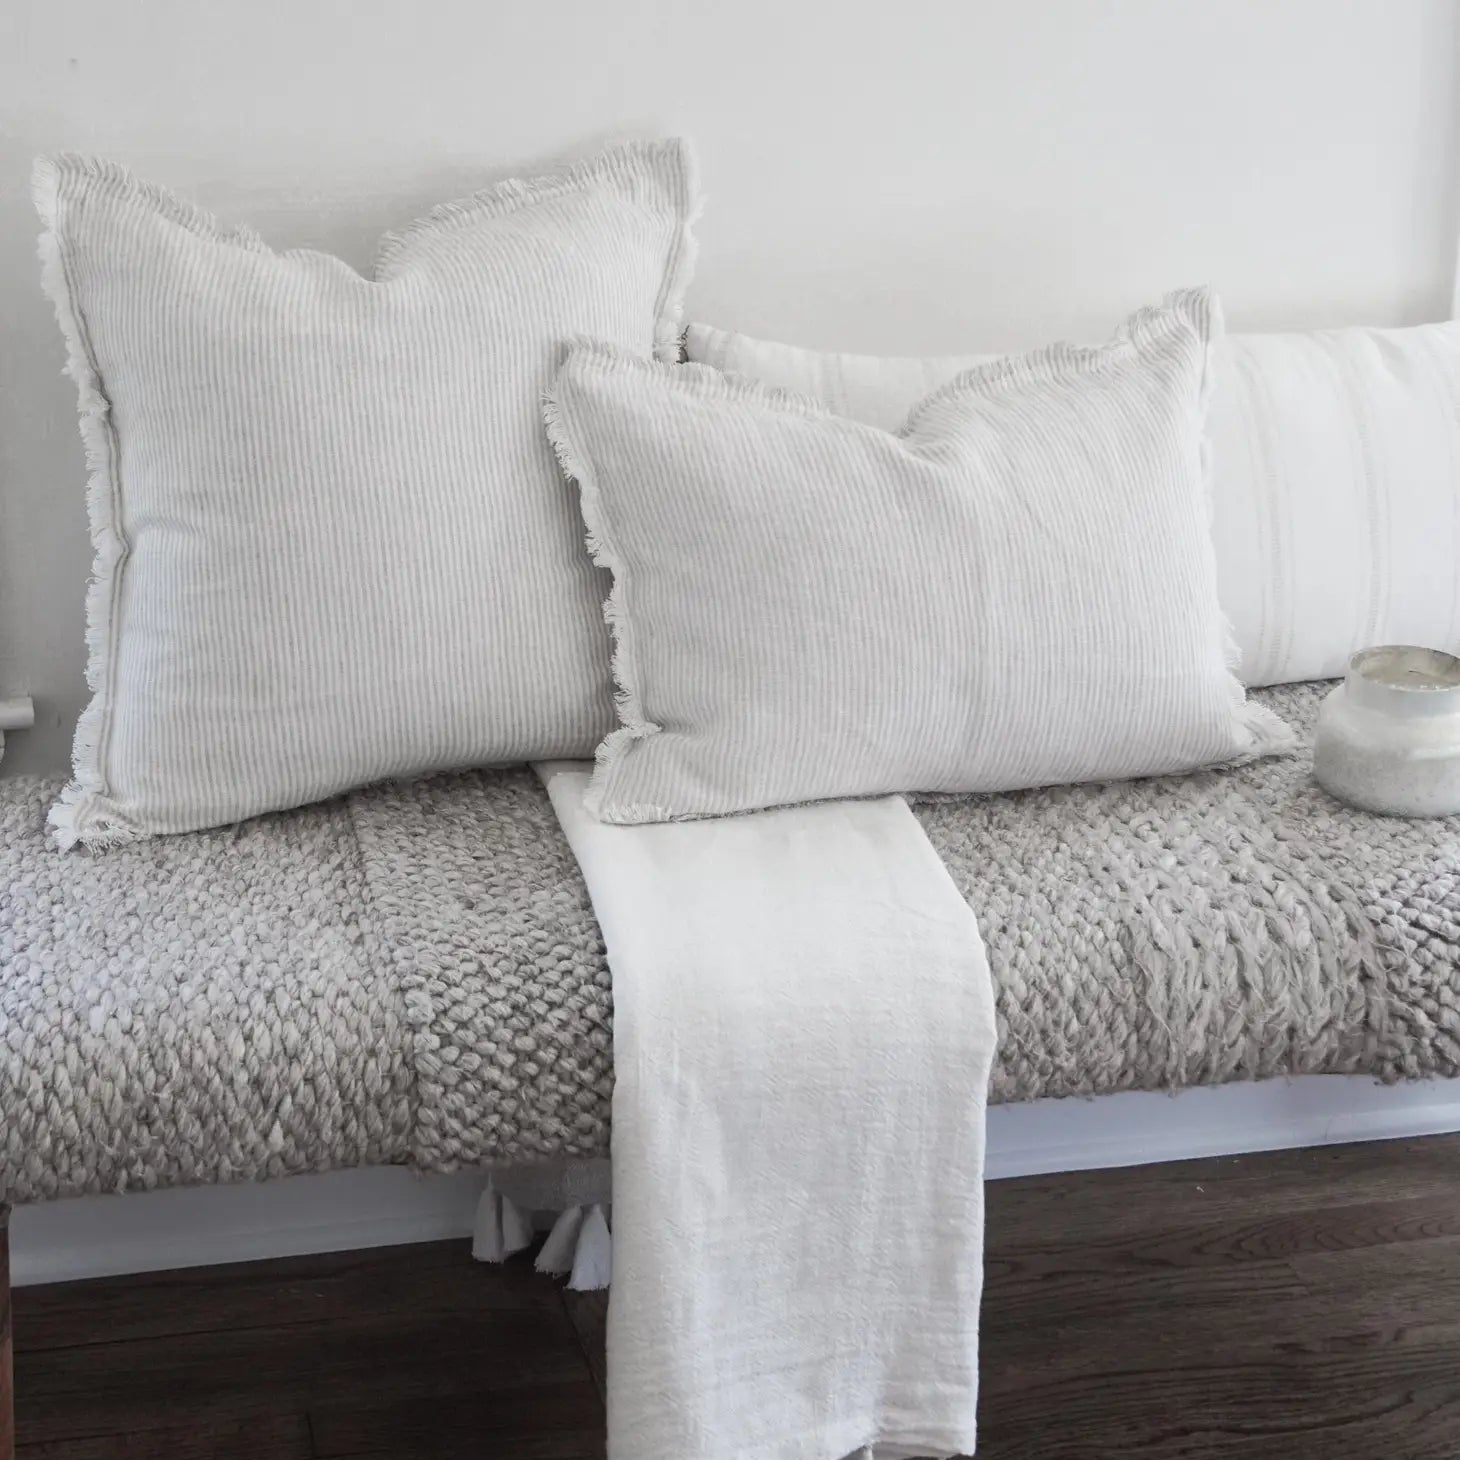 Light Grey & White Striped So Soft Linen Pillow Cover - Mindful Living Home